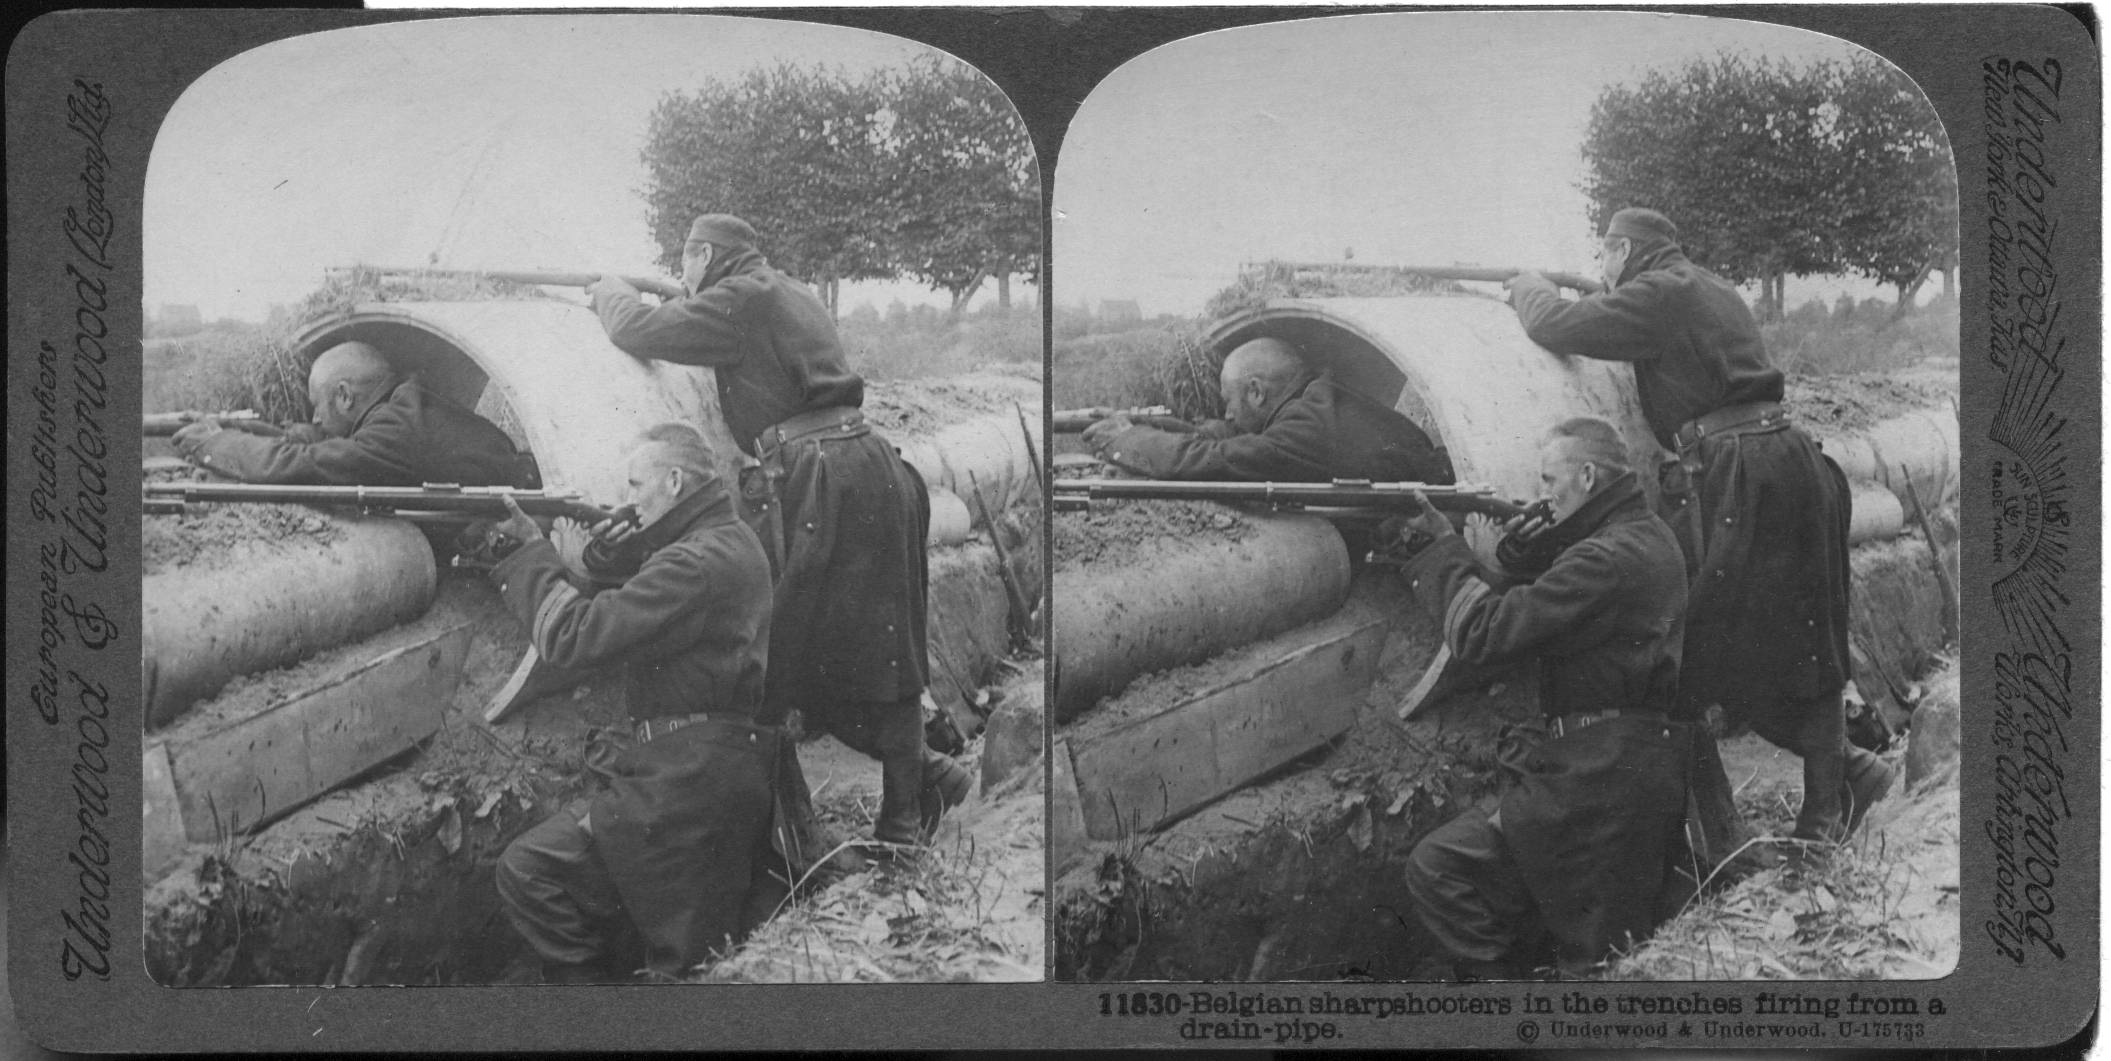 Belgian sharpshooters in the trenches firing from a drain-pipe